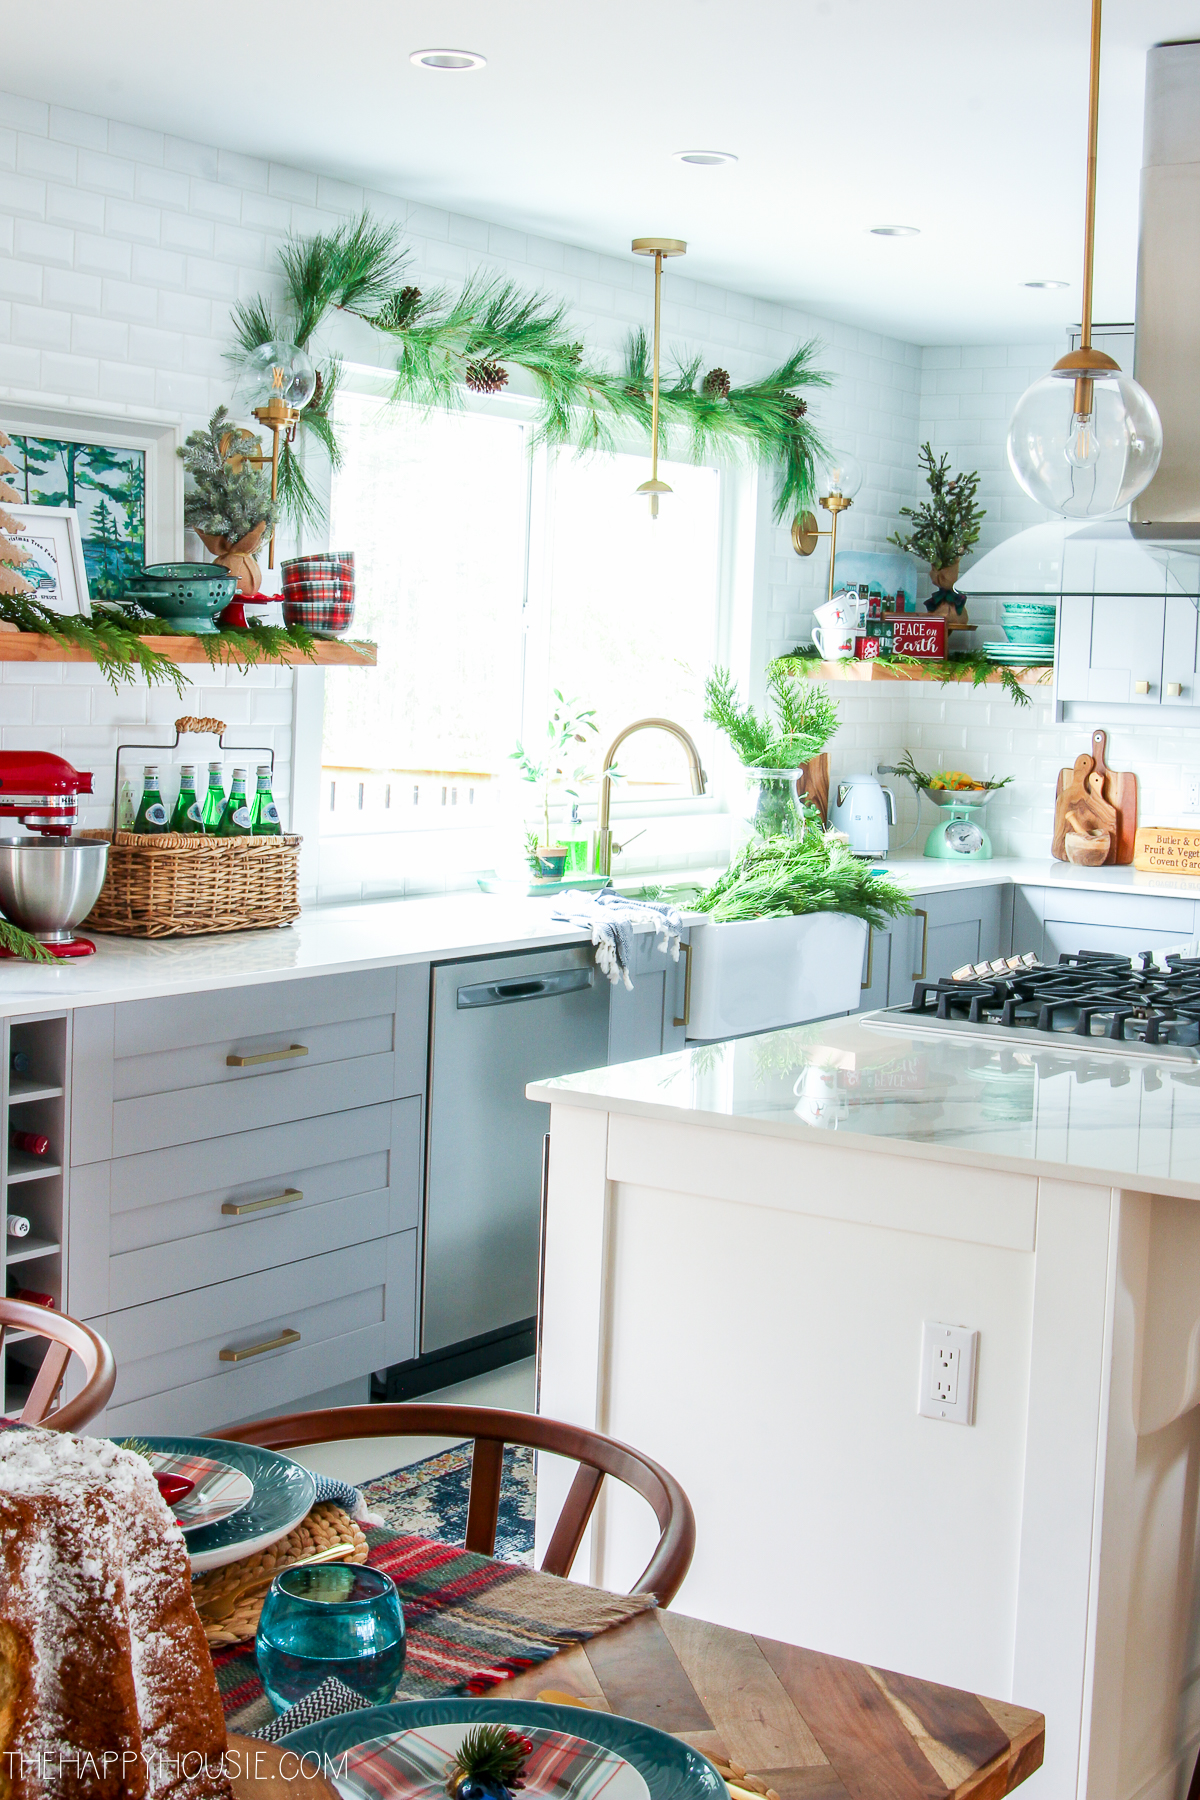 The white and bright kitchen with holiday decorations in it.